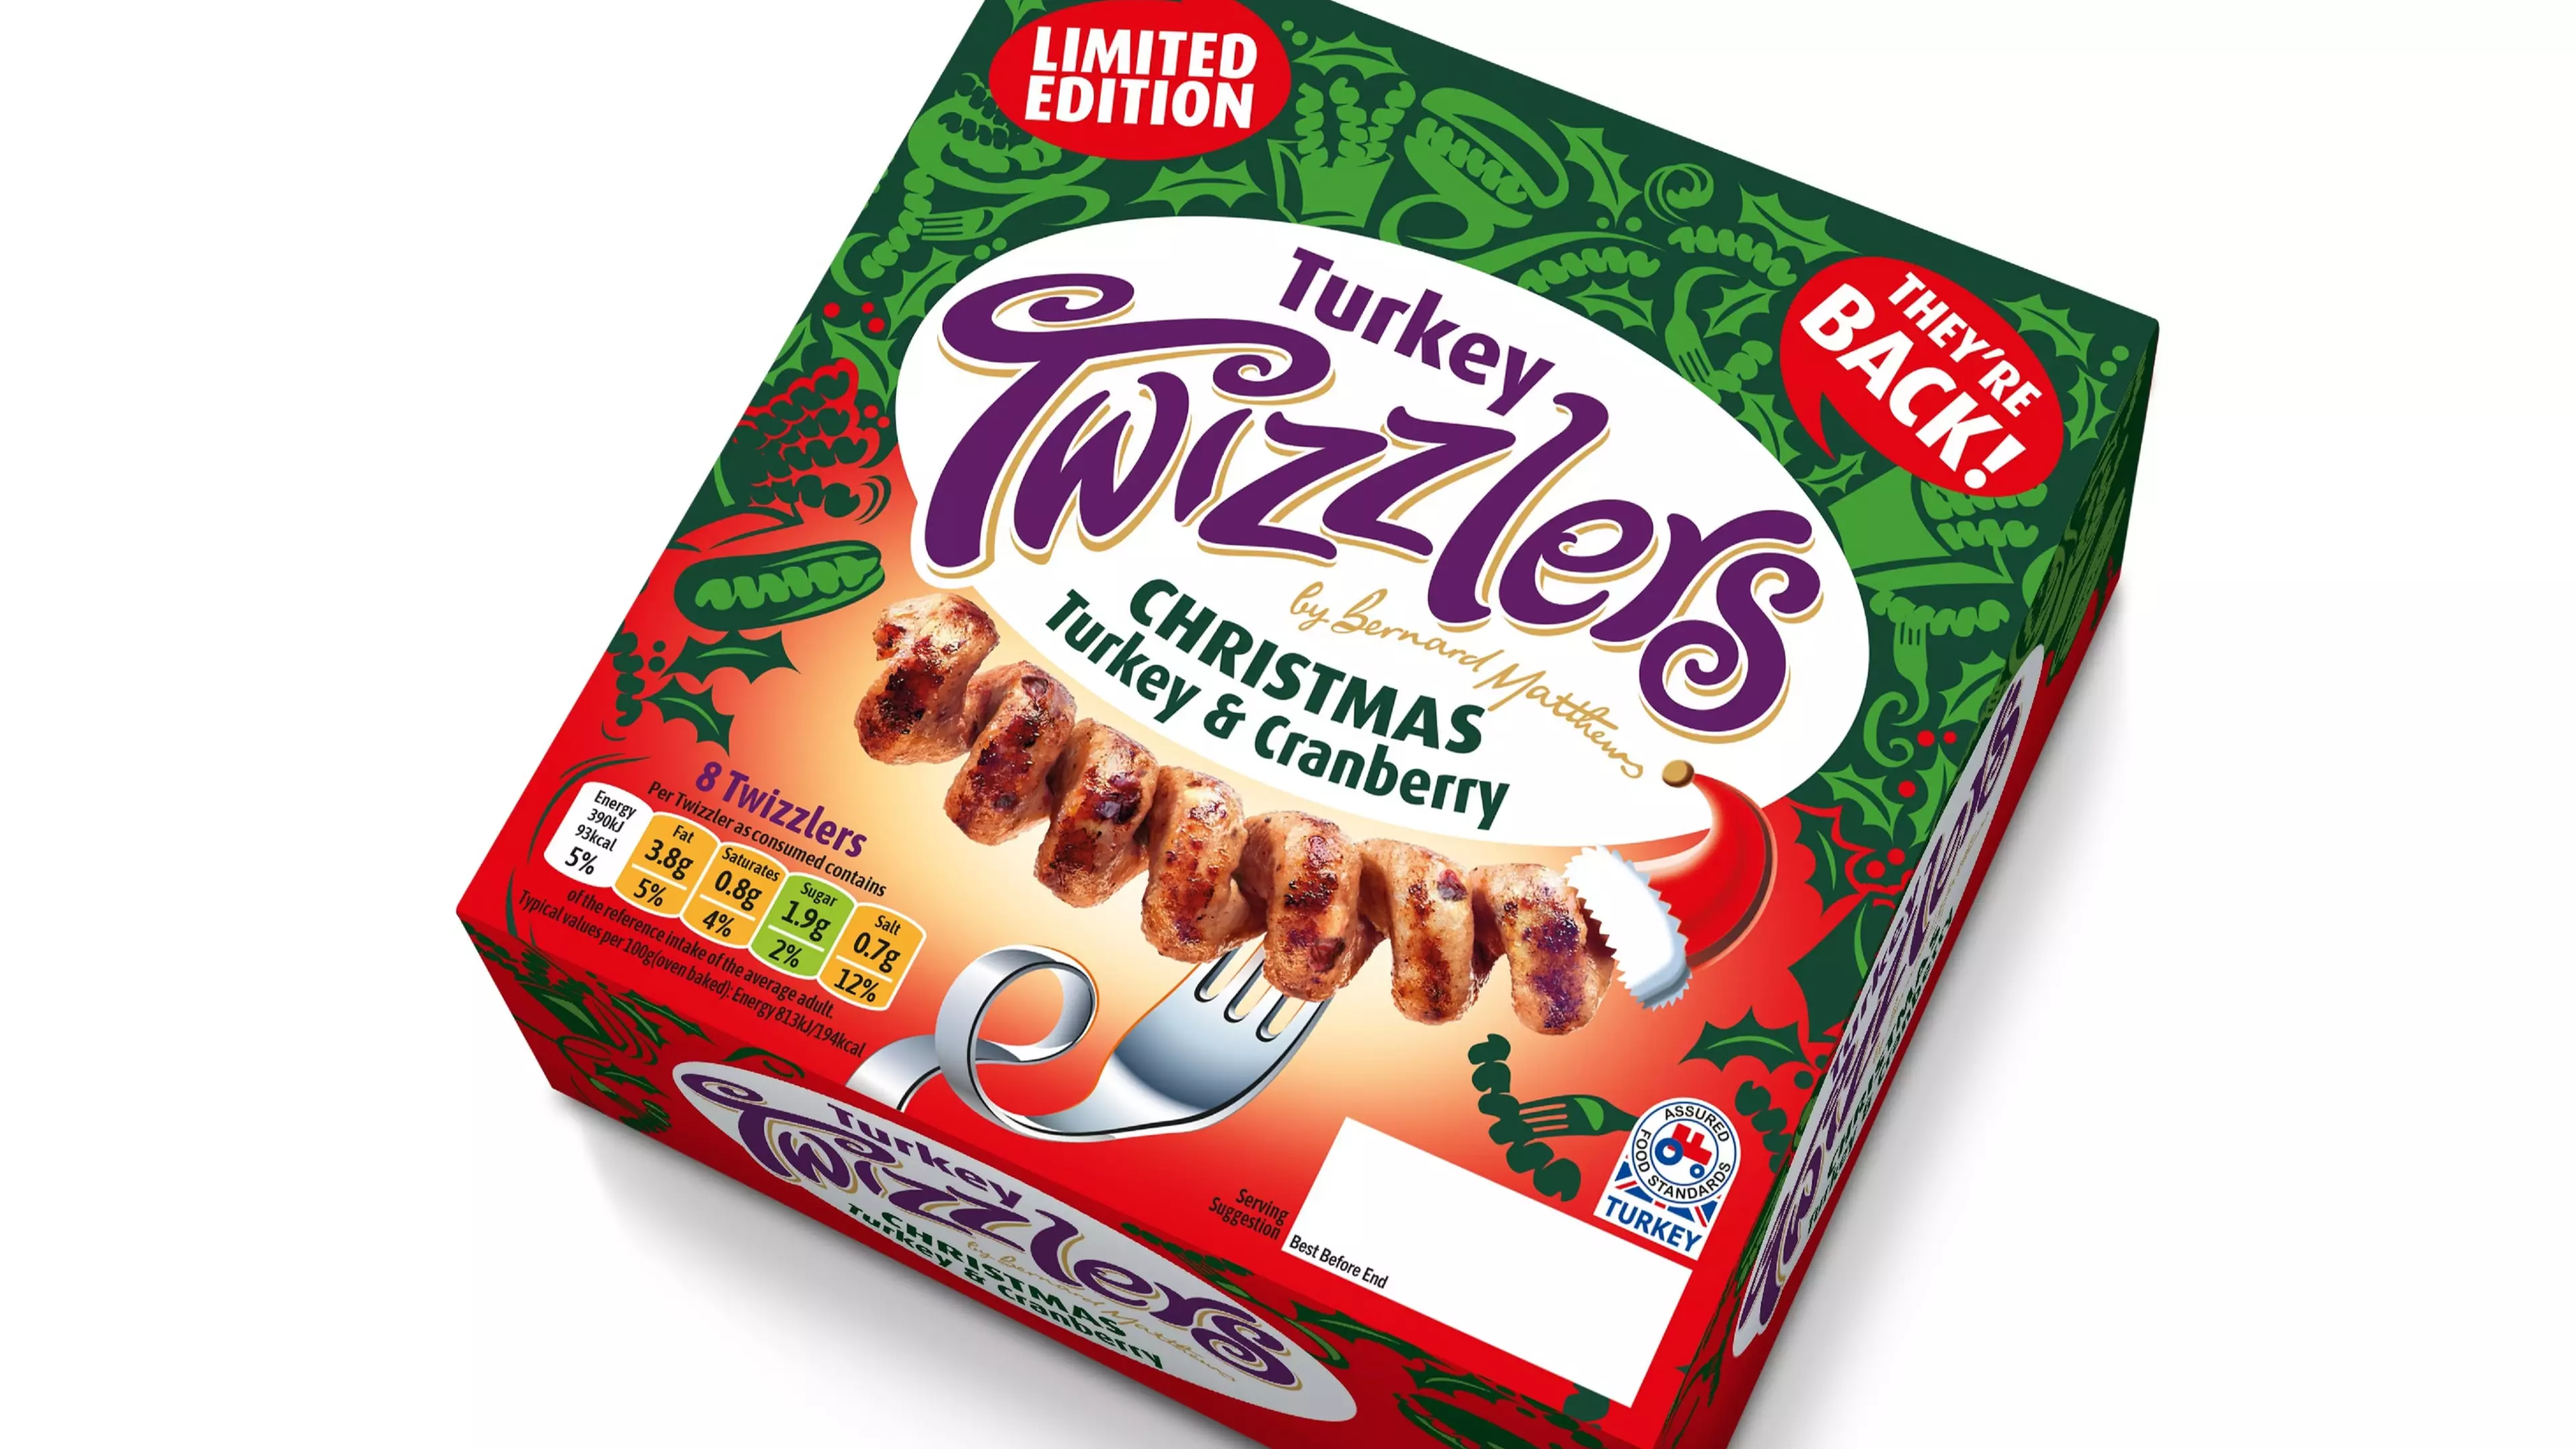 Iceland Launches Christmas Turkey Twizzler With Cranberries